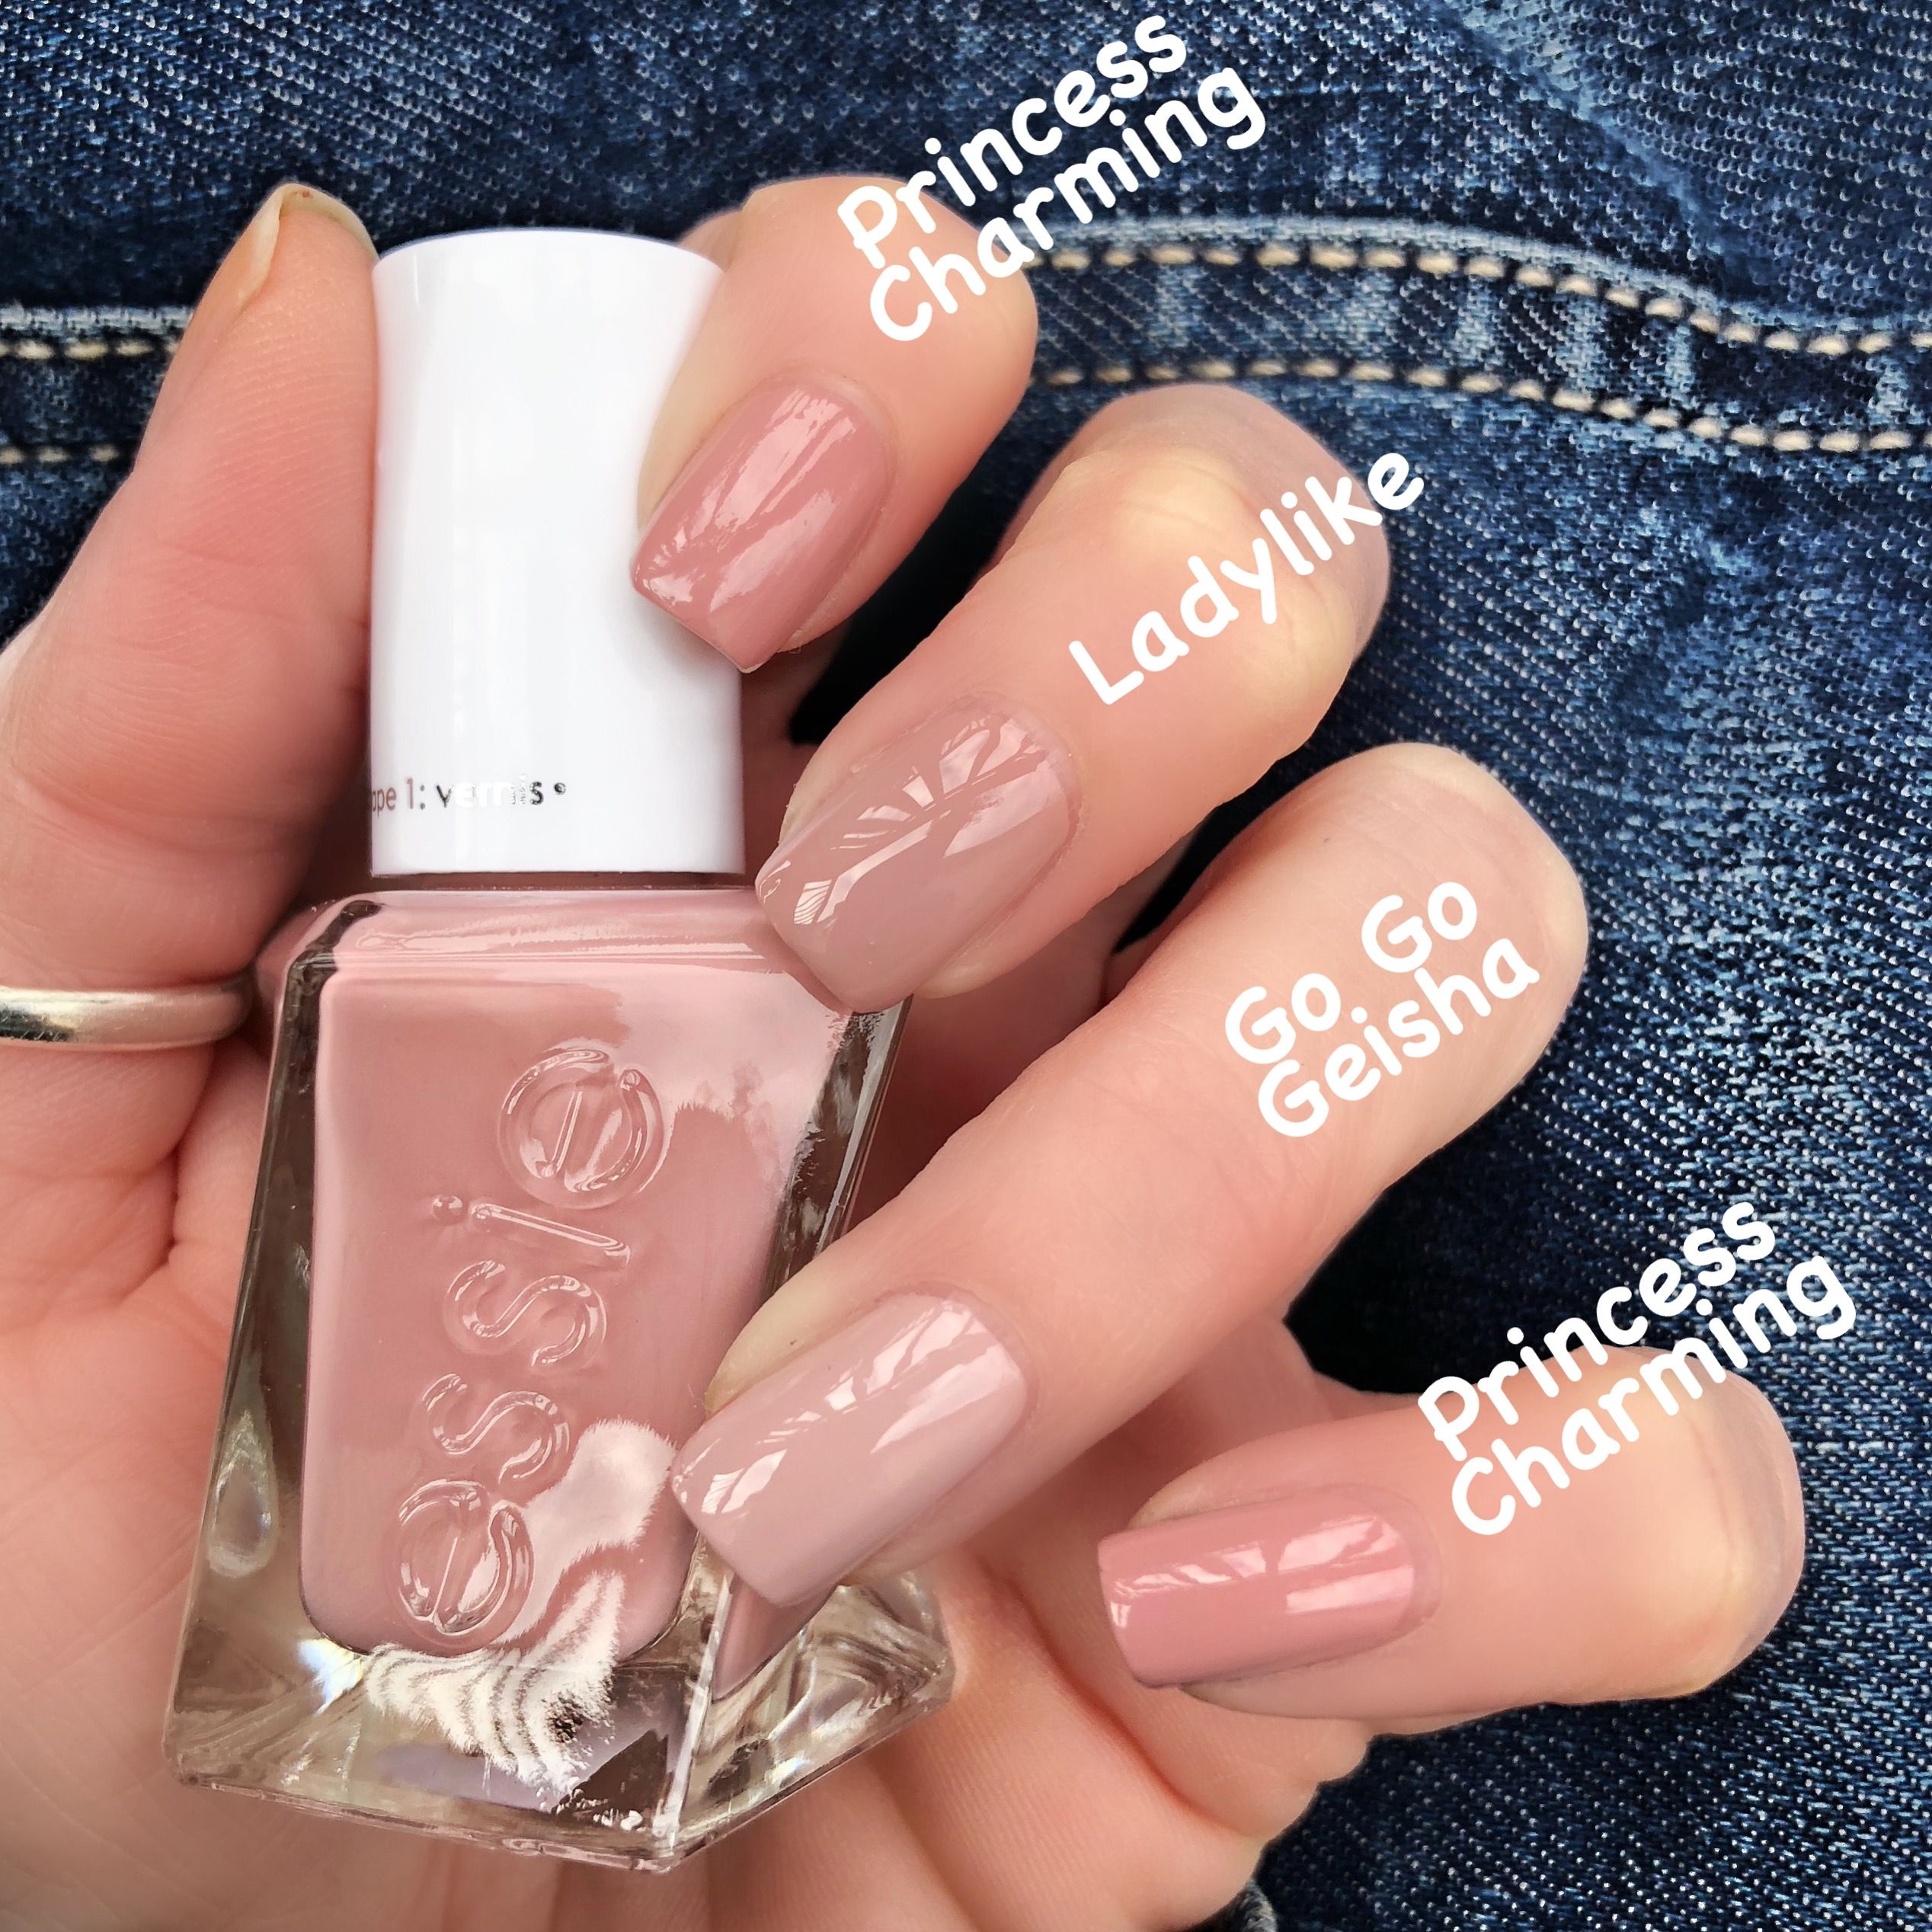 Comparison Swatches To Essie Princess Charming From The Enchanted Gel Couture Line Instagram Livwithbiv Gelove Nehty Nehty Lak Na Nehty